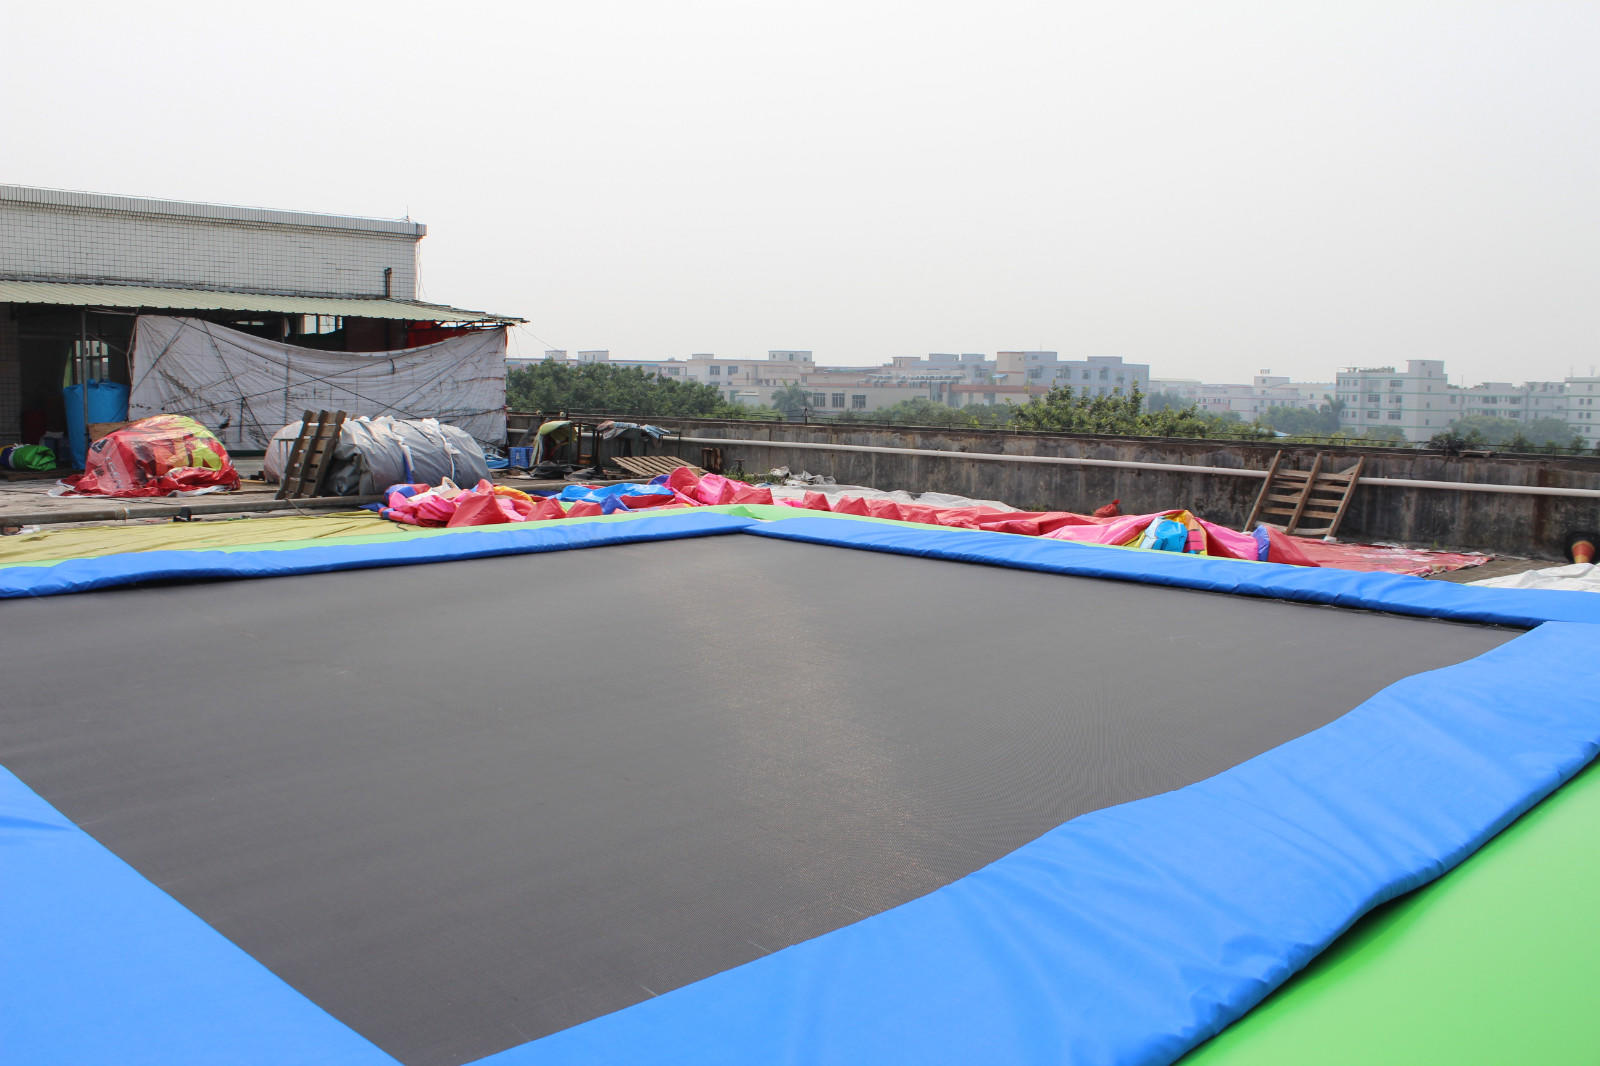 certified inflatable lake trampoline wholesale for child